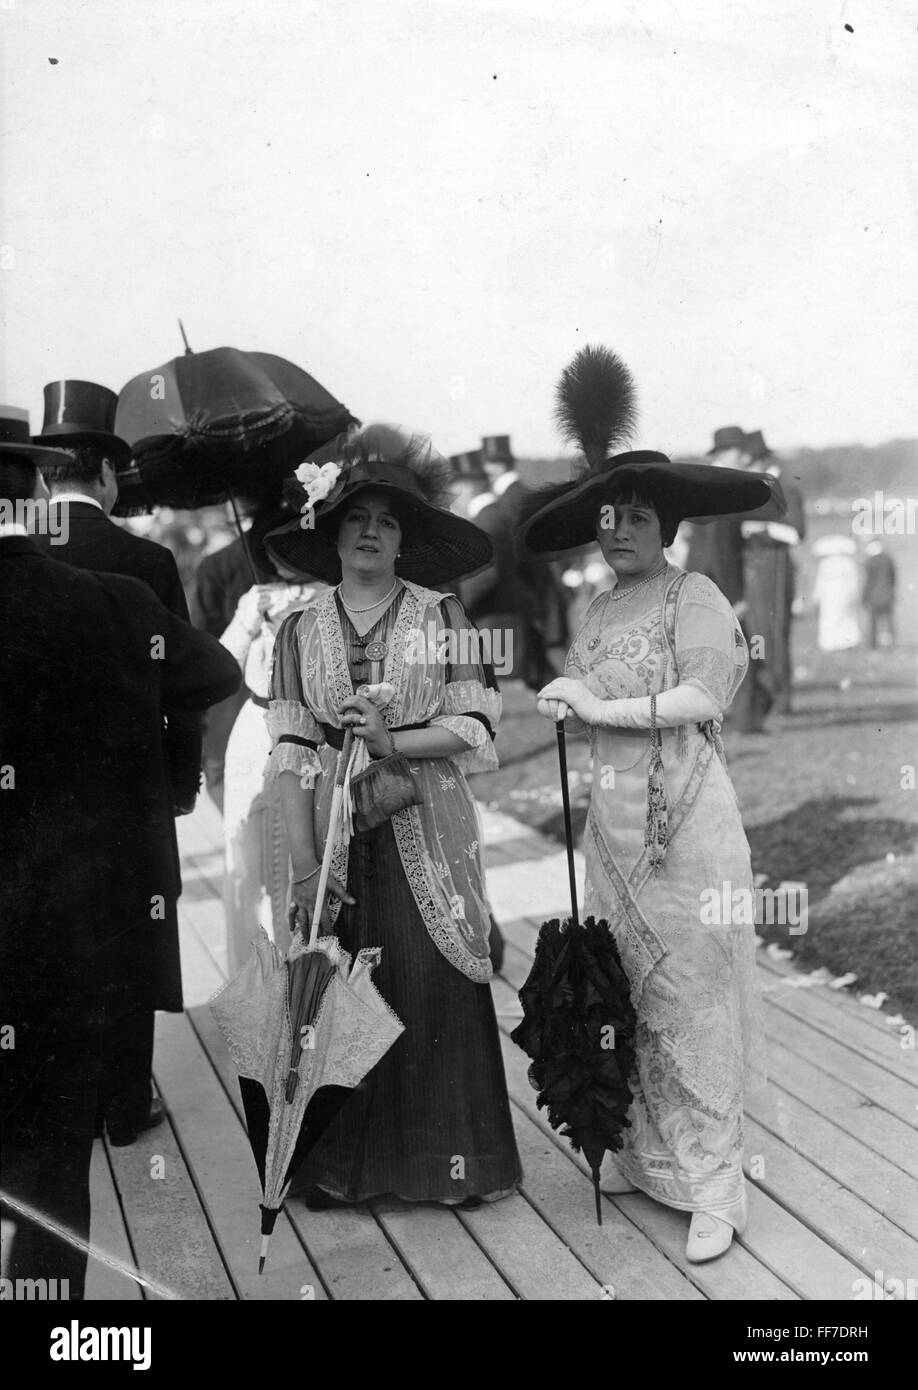 fashion, early 20th century / turn of the century, two ladies, circa 1900, Additional-Rights-Clearences-Not Available Stock Photo